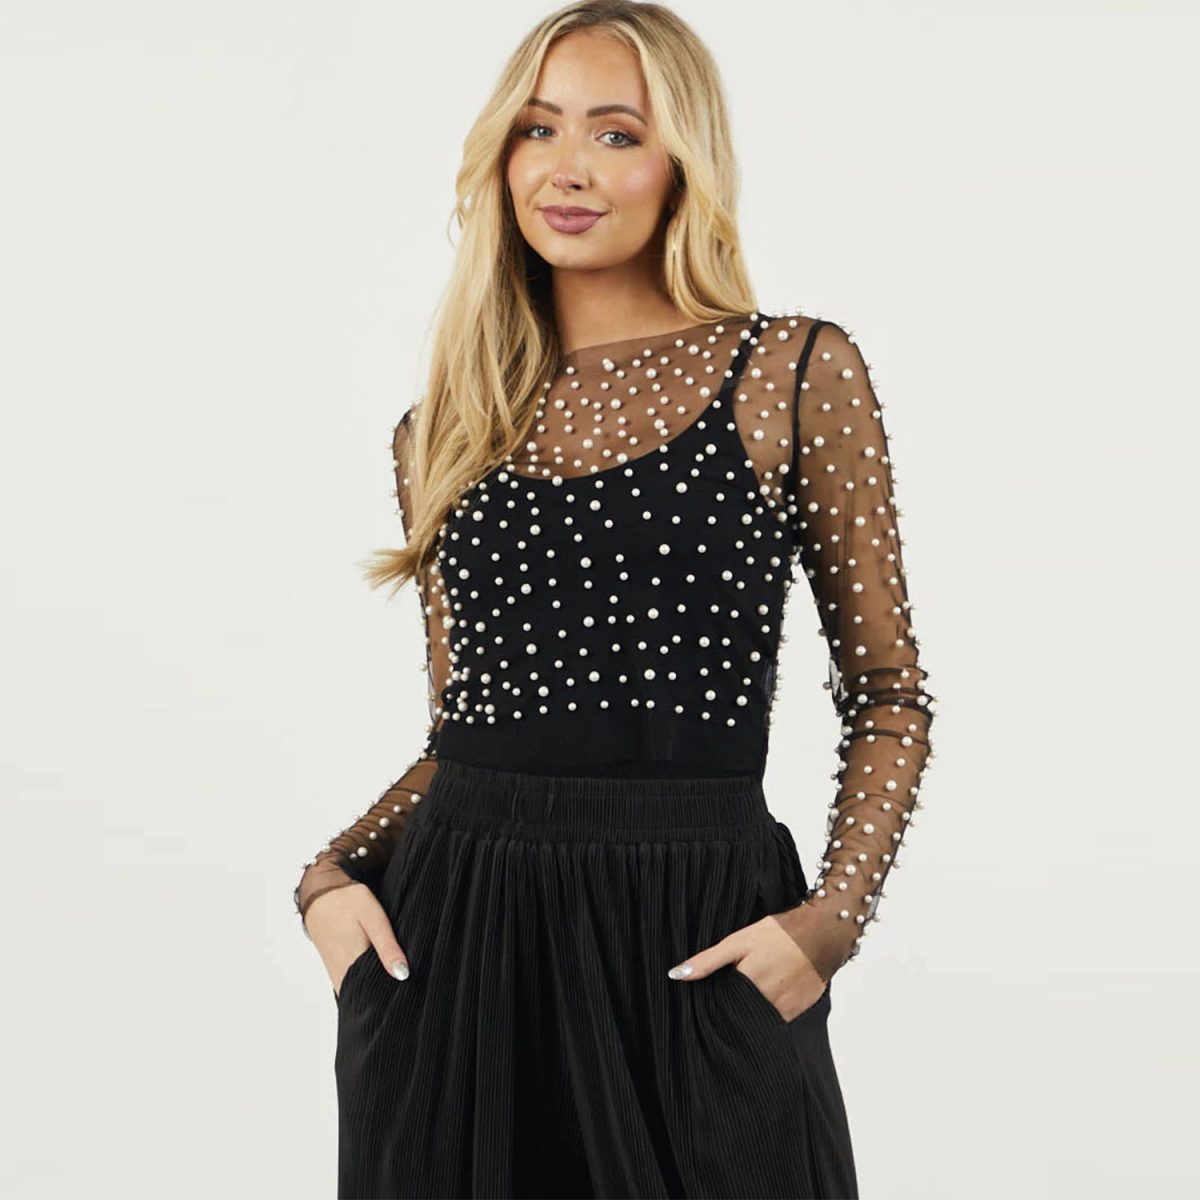 Bubble Beads Sheer Mesh Long Sleeved Top in T-shirts & Tops